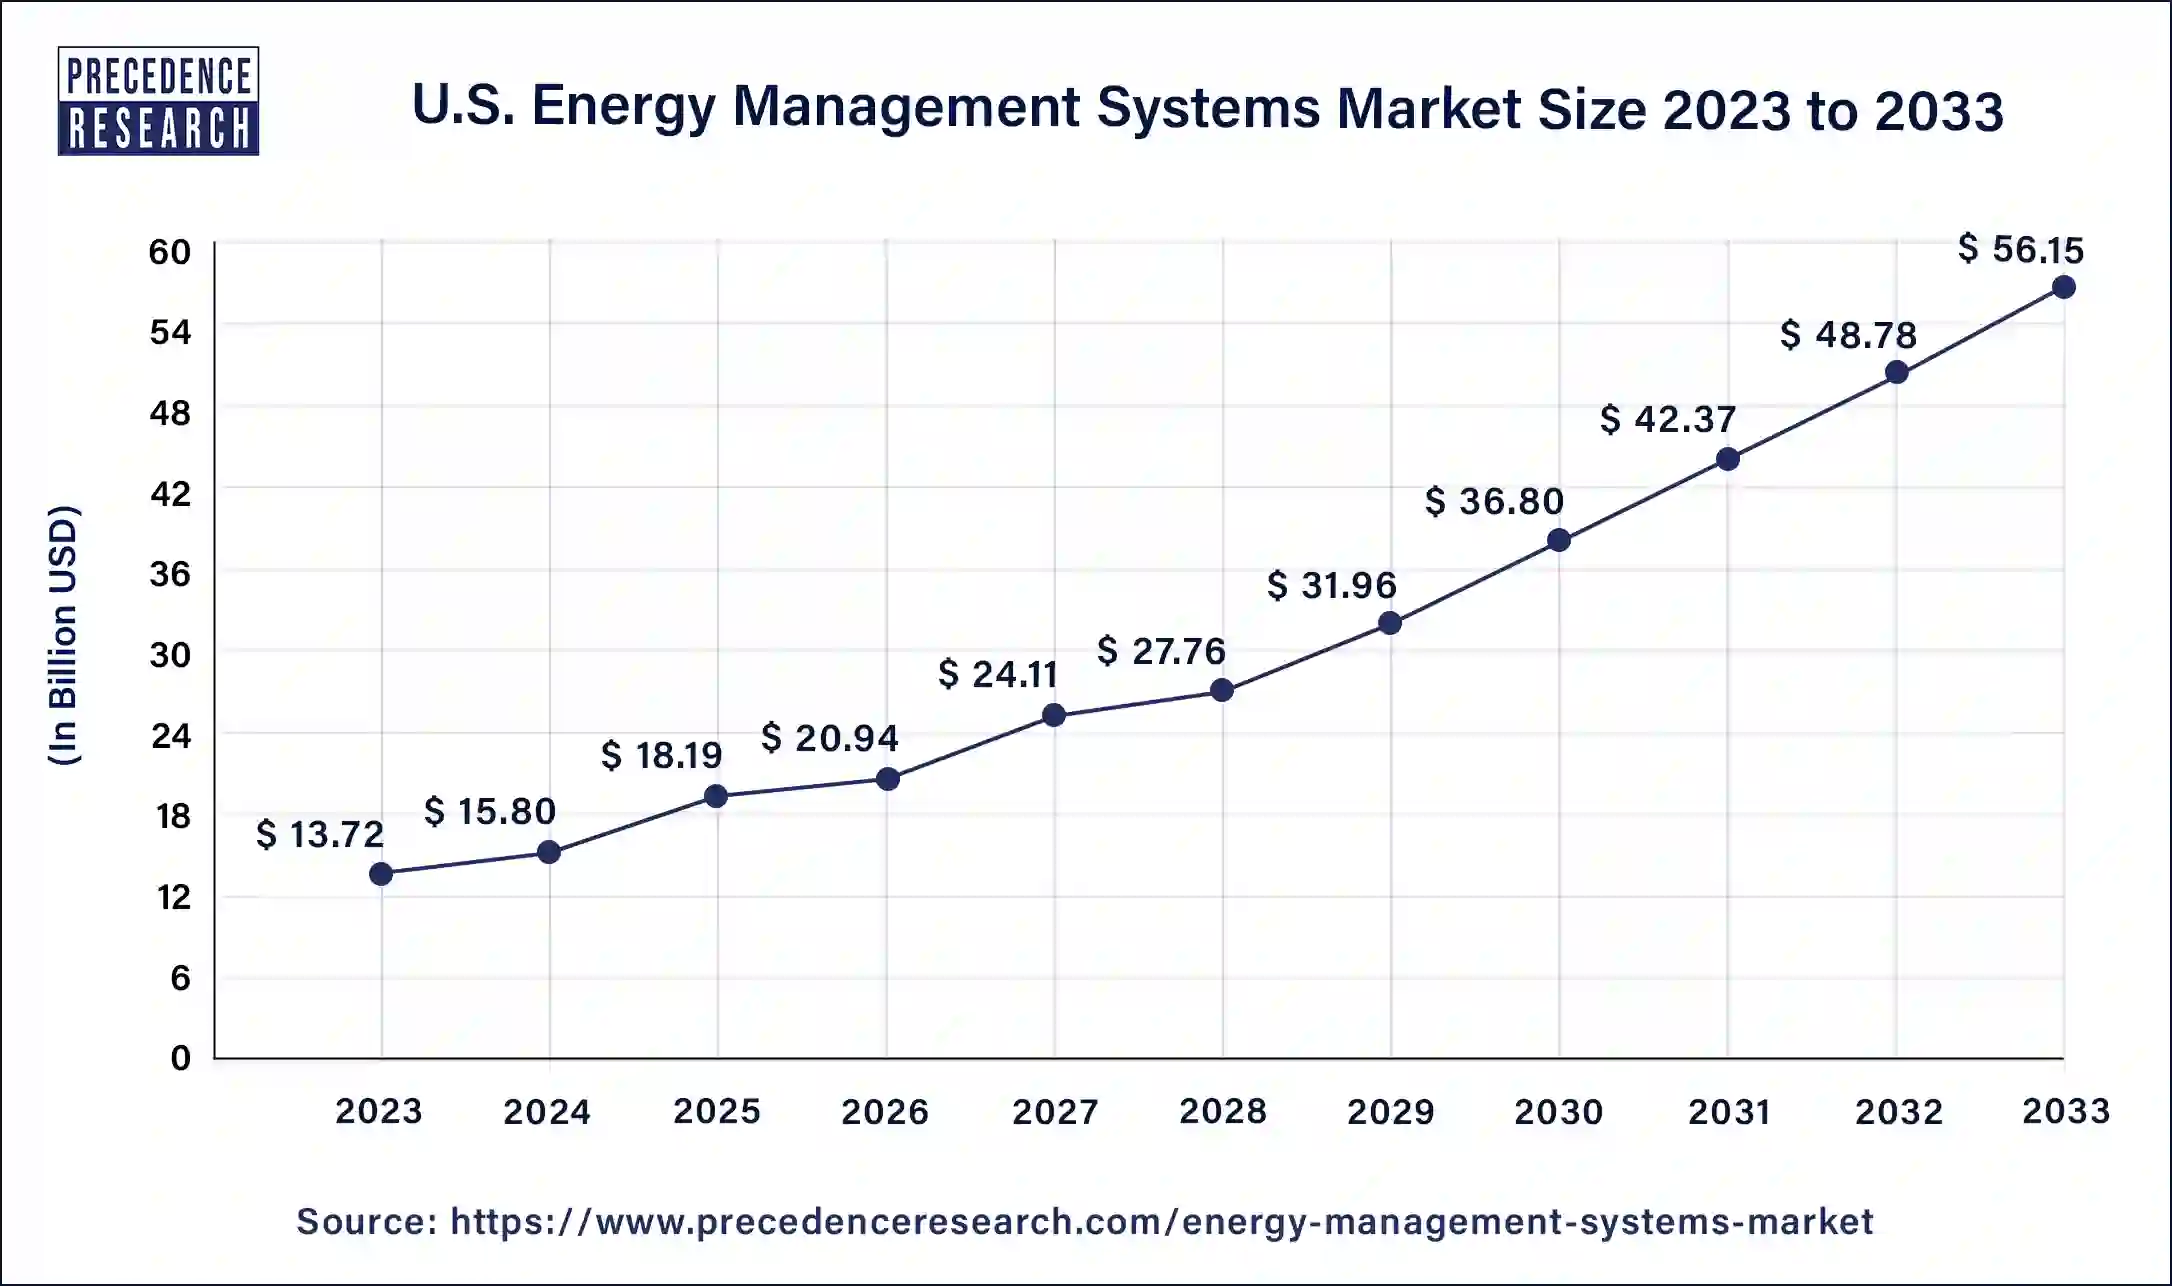 U.S. Energy Management Systems Market Size 2024 to 2033